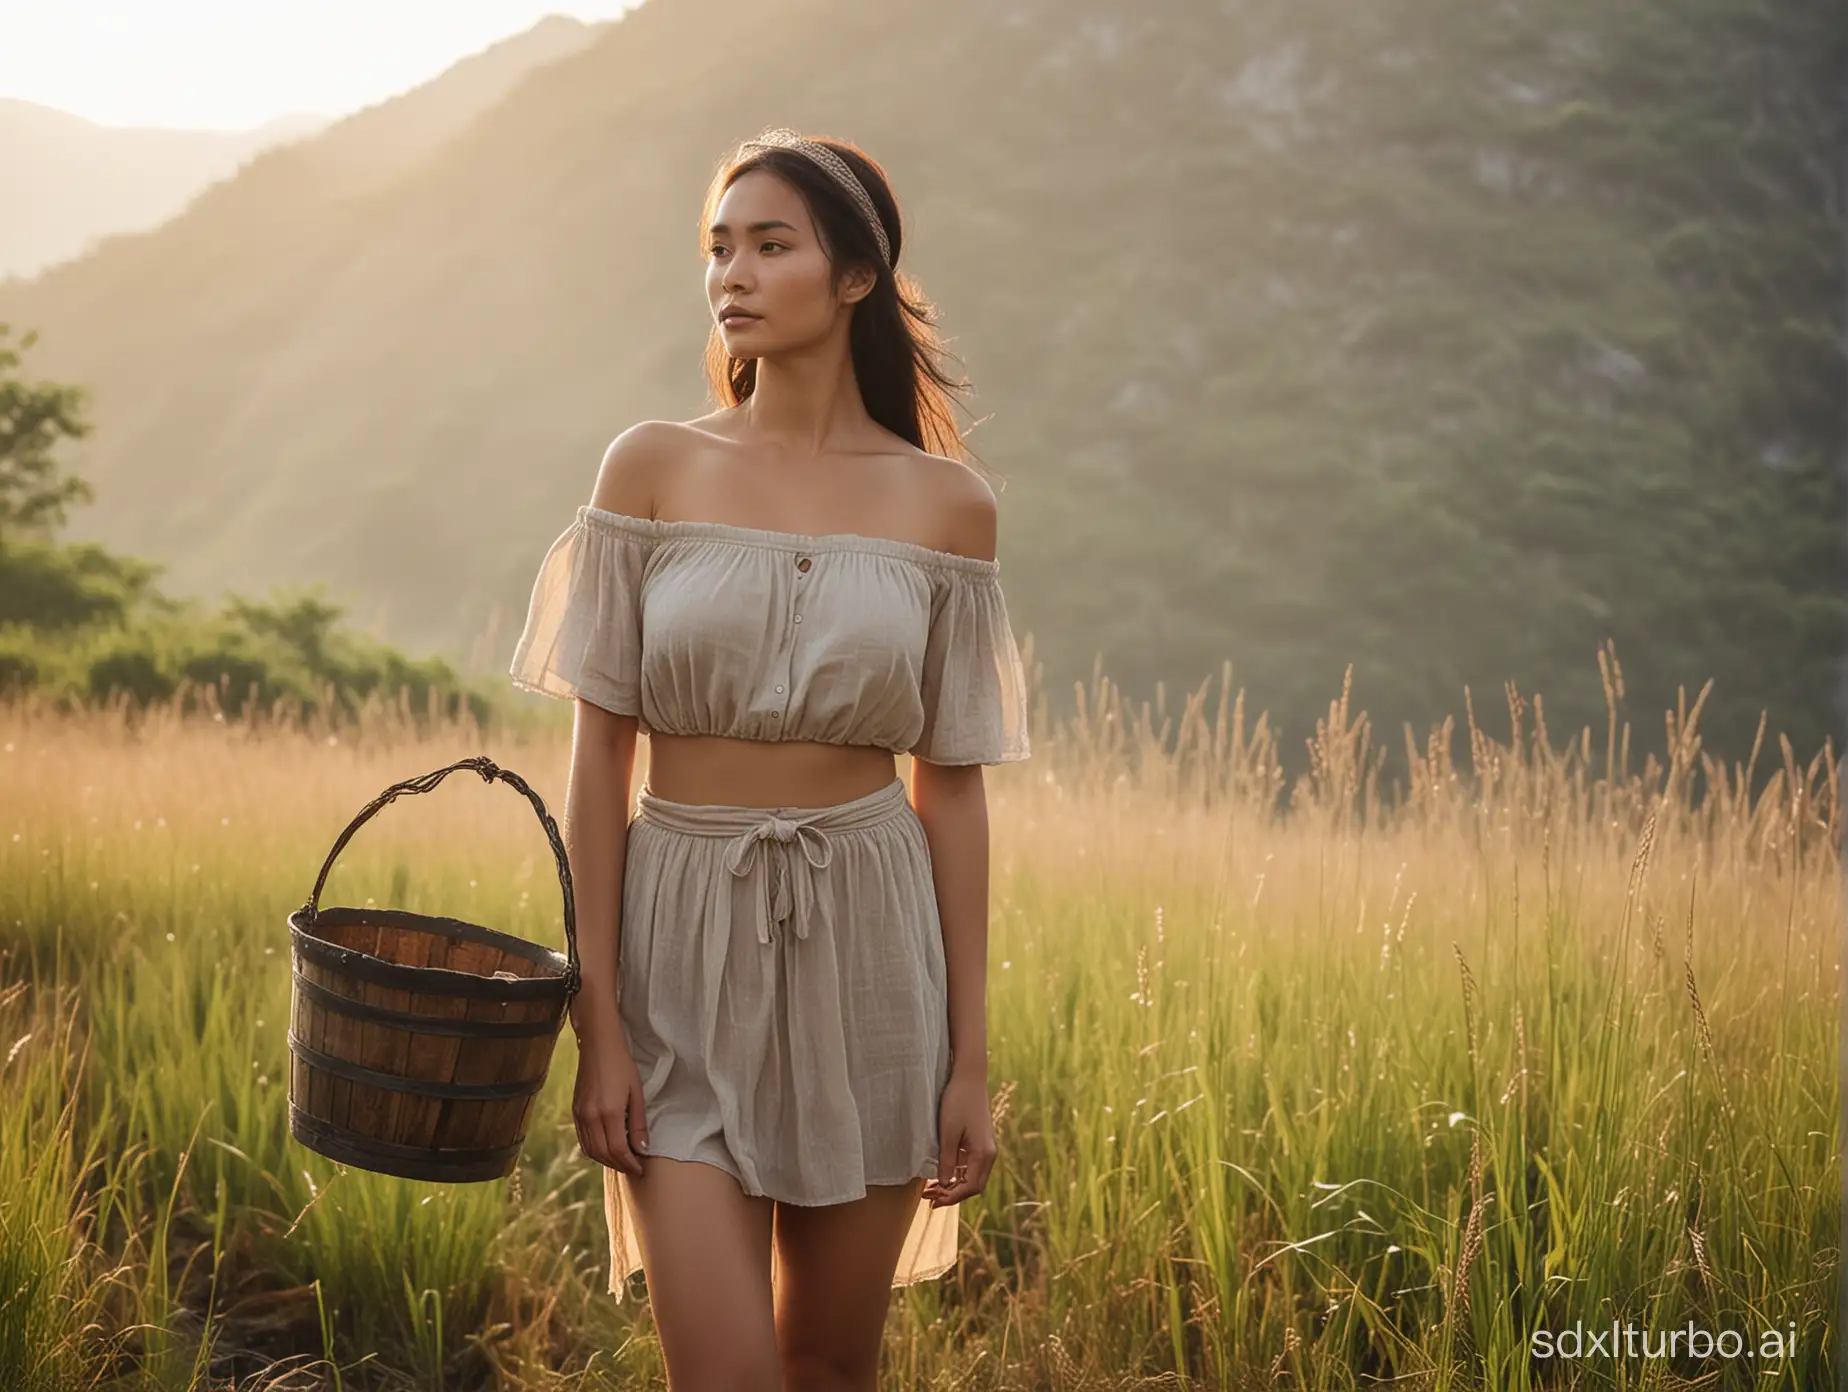 40 years old filipina lady in high grass holding wooden bucket. Hilltop in morning mist. Sunrise, sun rays. Wearing unbuttoned cropped loincloth shirt. Revealing. Profusely sweating. Wet clothes. Headband. Medieval time. Film grain, soft lighting. Bokeh. Fat Legs. Freckles skin. Small flat breasts. Hair tied. Contour of volcano in background. Full body from side. Erected nipples. Naked hips. Deep V cut. Seducing face. Inviting pose. 